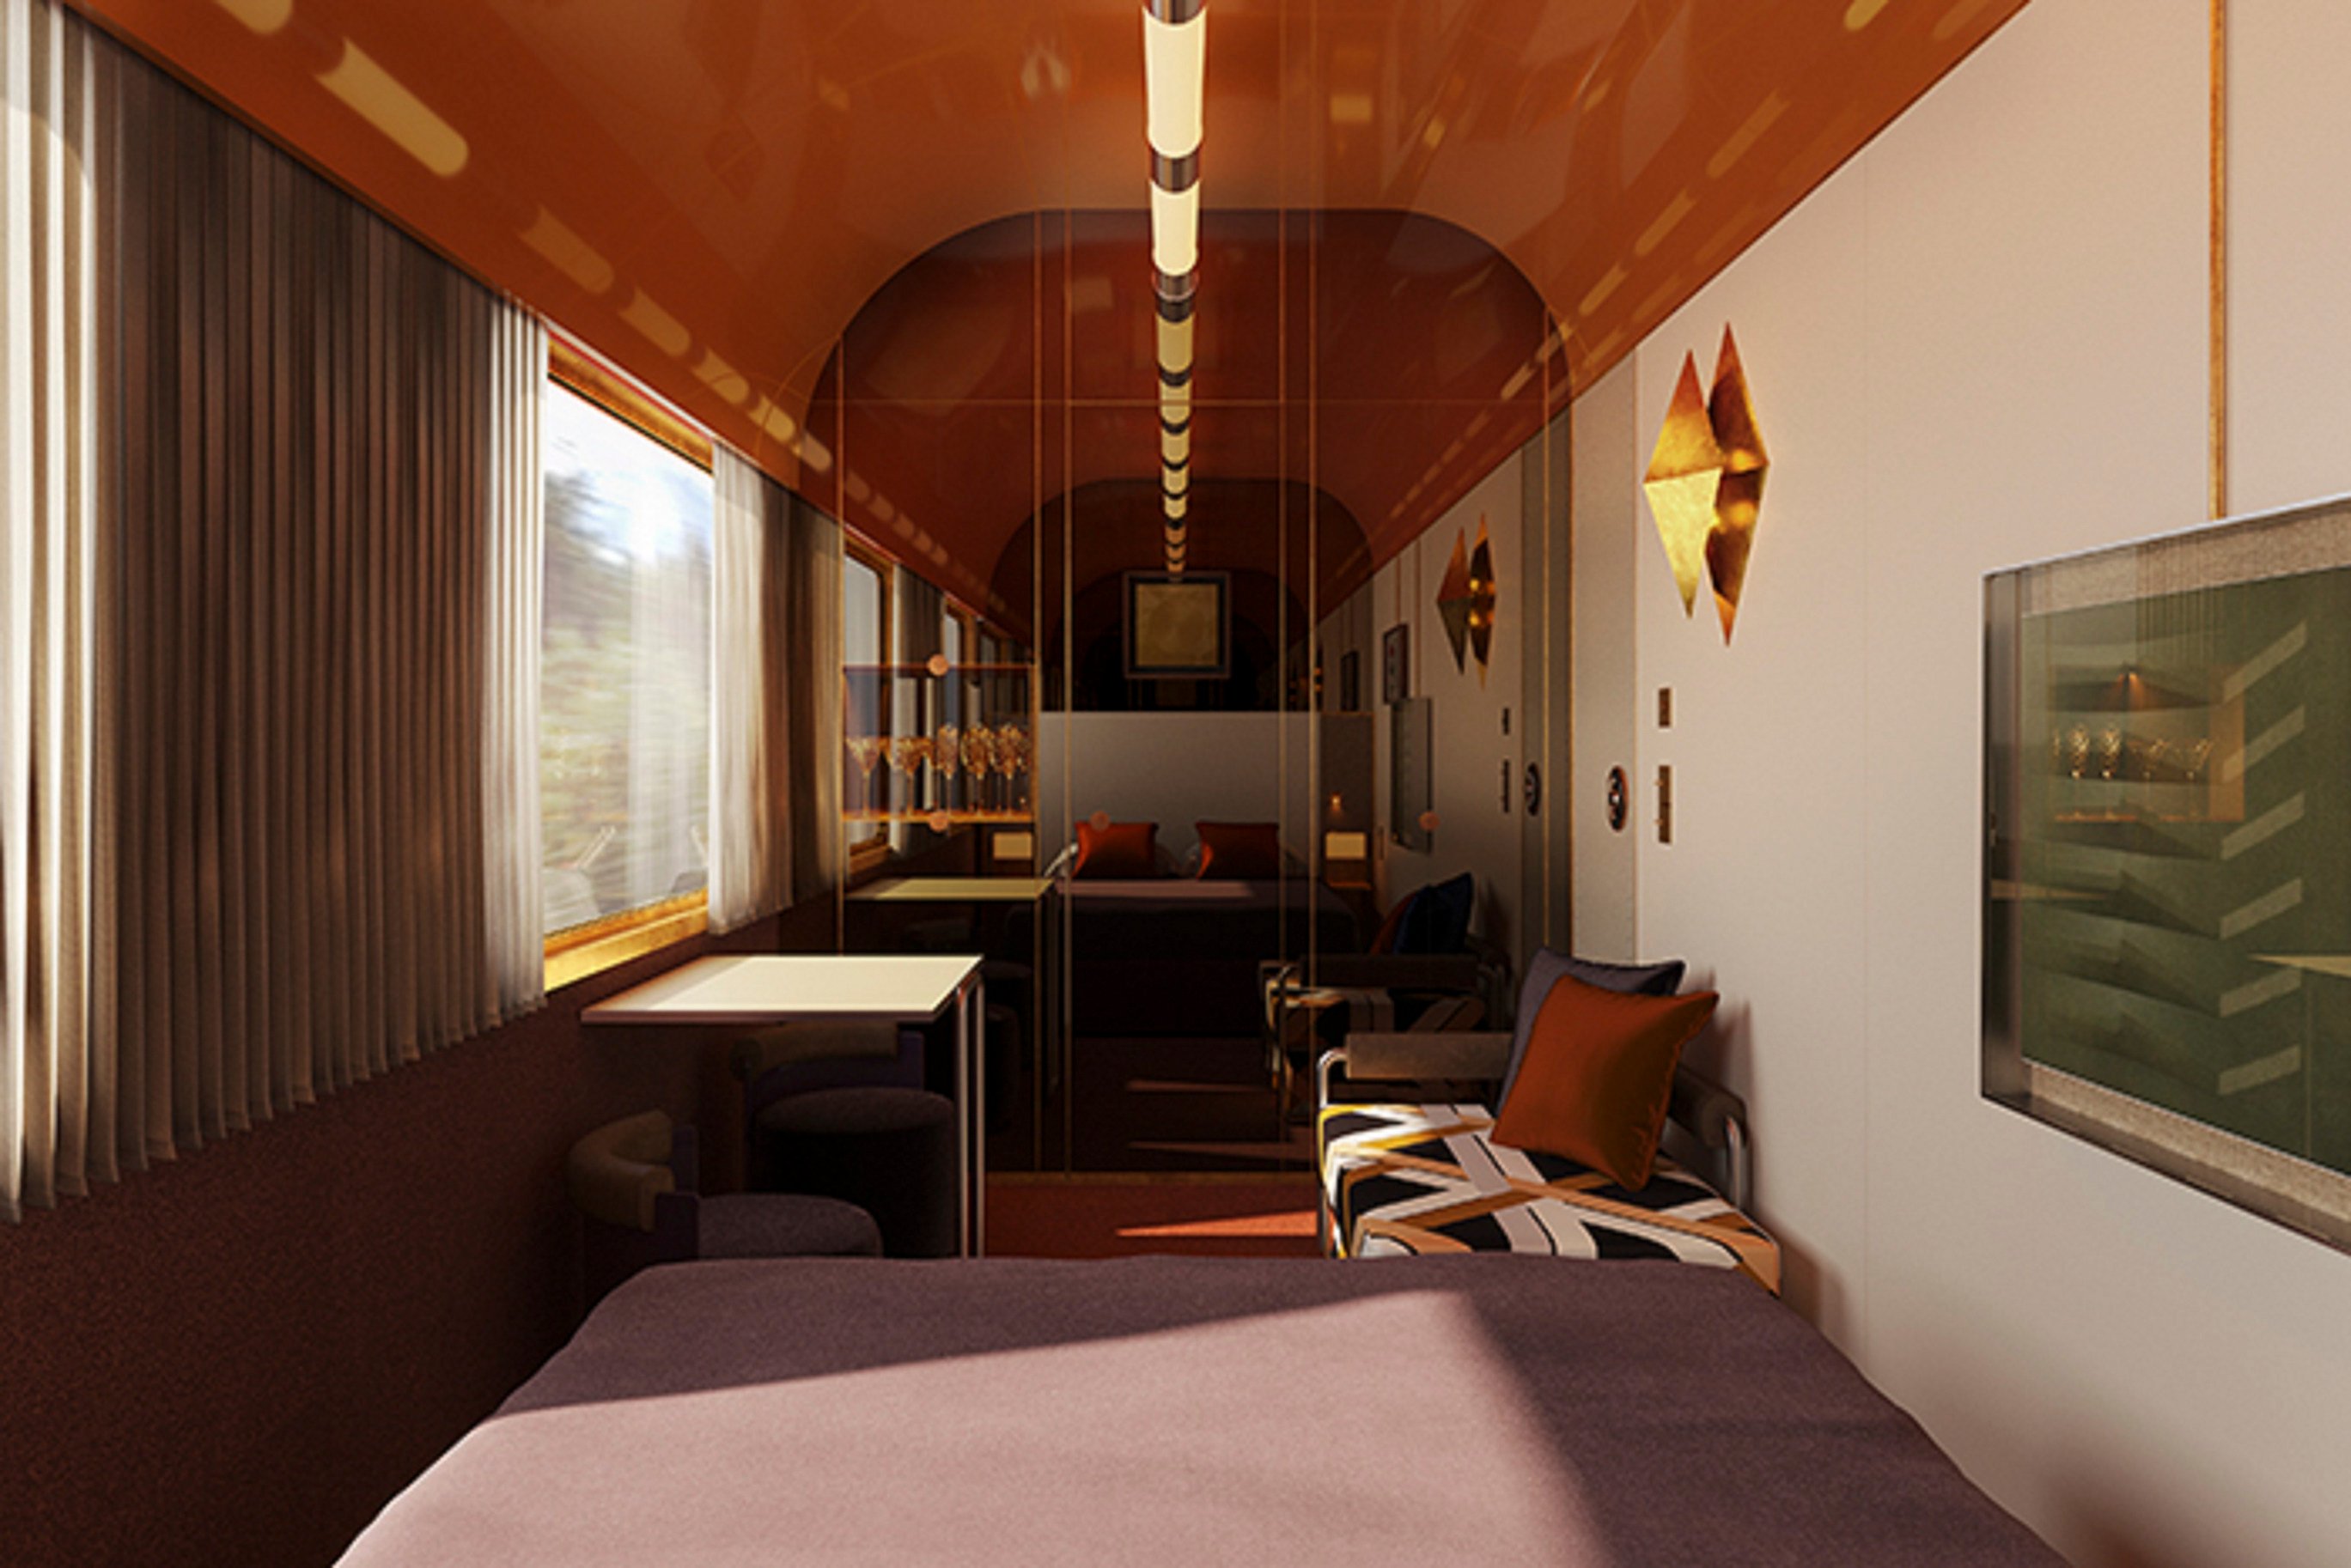 A luxury cruise on rails': Orient Express train trips across Italy at up to  US$27,000 per night for 2 aimed at wealthy travellers seeking guilt-free  adventures